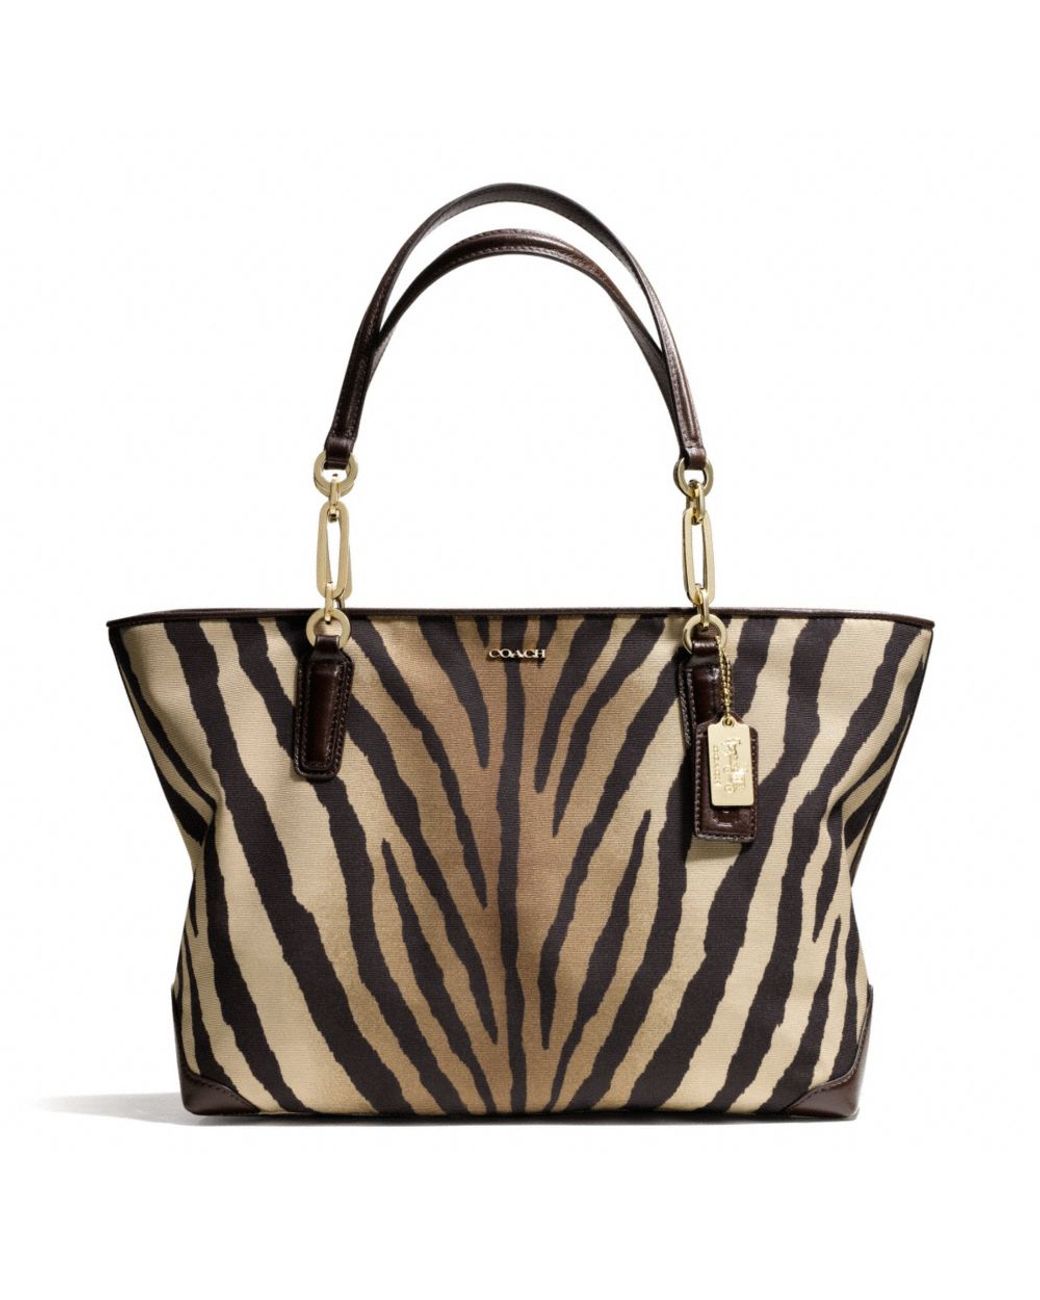 COACH GONE WILD? NEW Coach Animal Print Collection! *Shop With Me!* -  YouTube